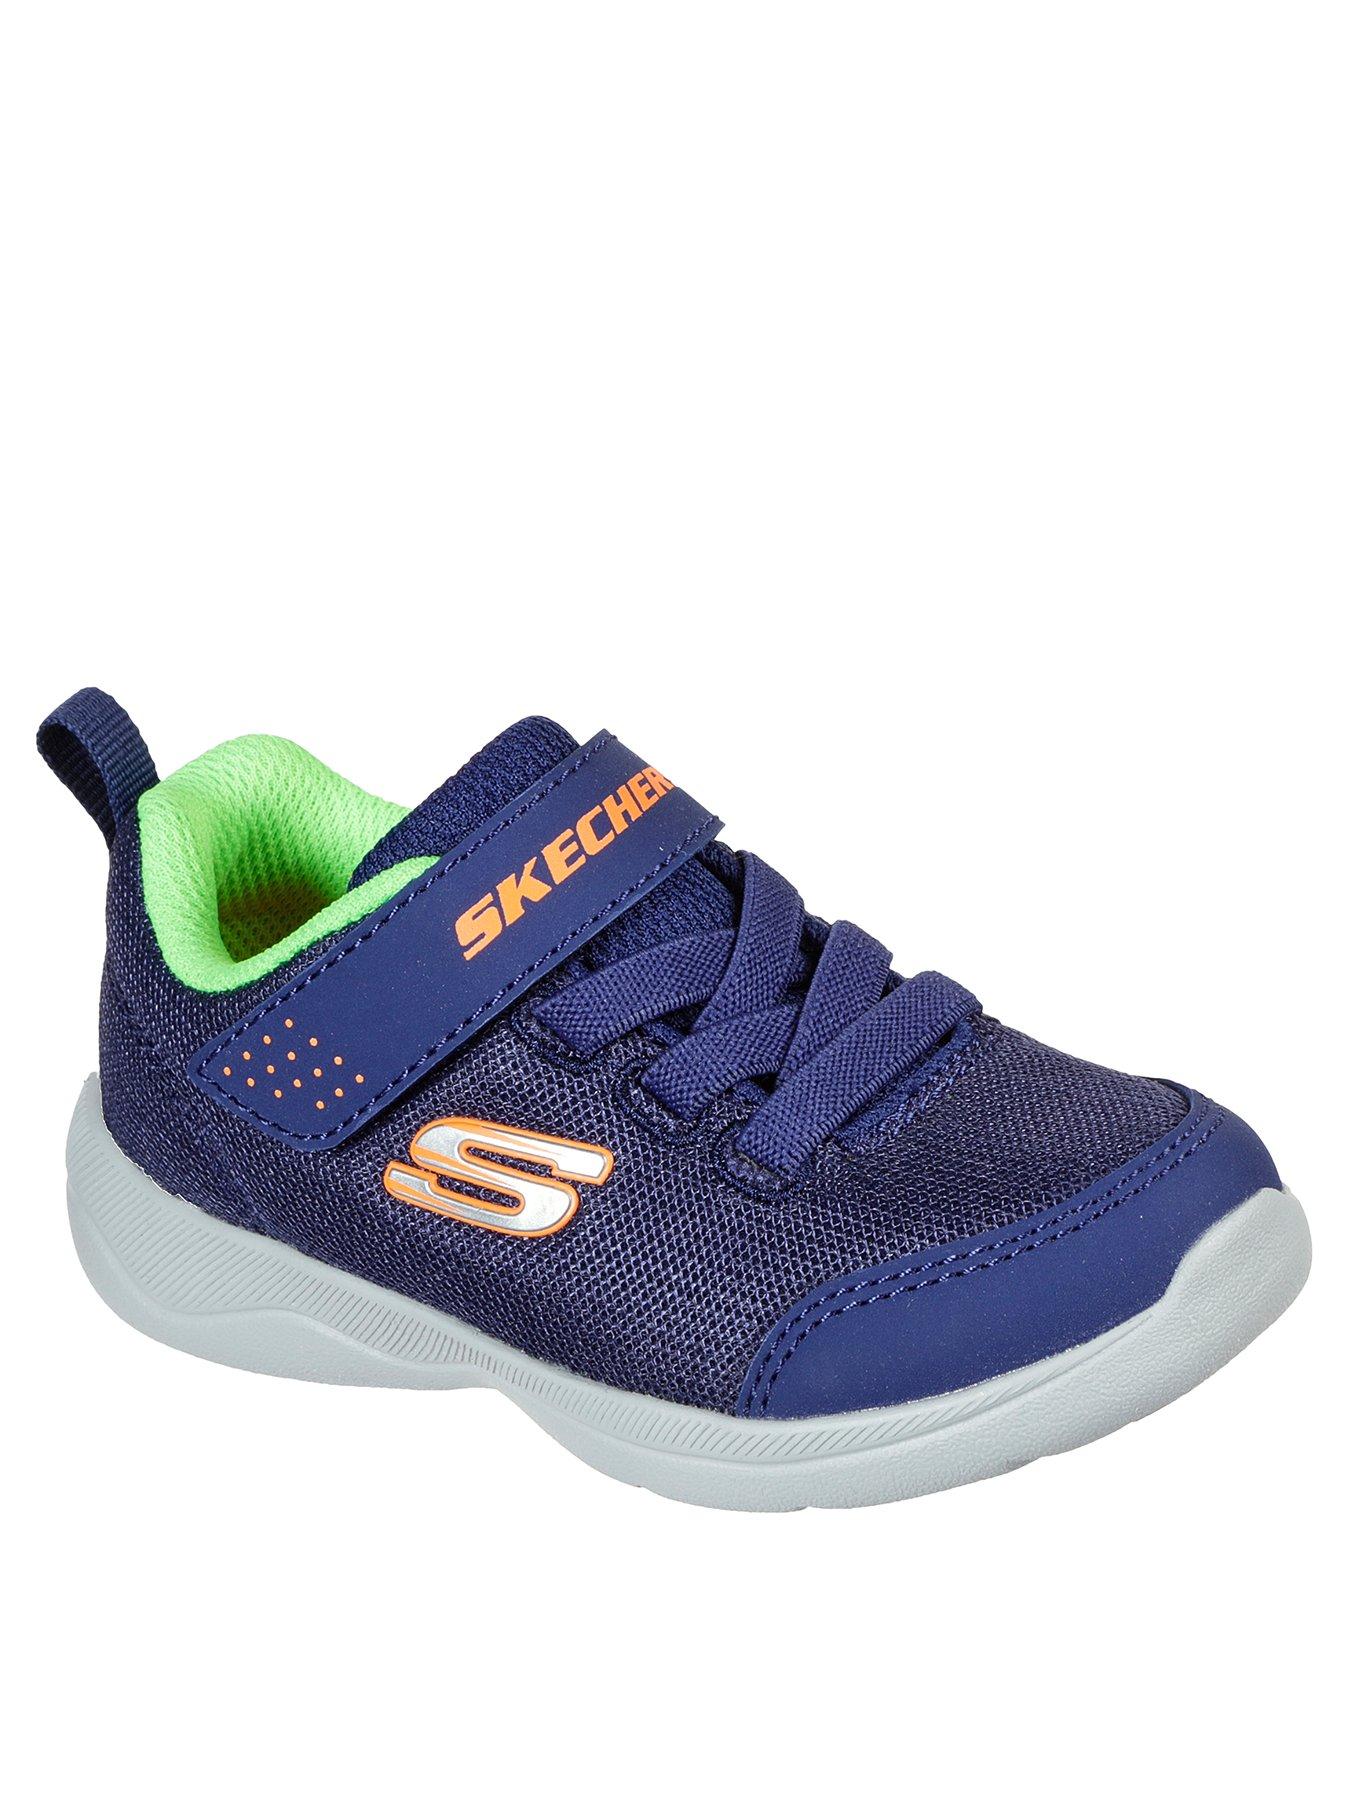  SKECH-STEPZ 2.0 BOYS TODDLER TRAINERS